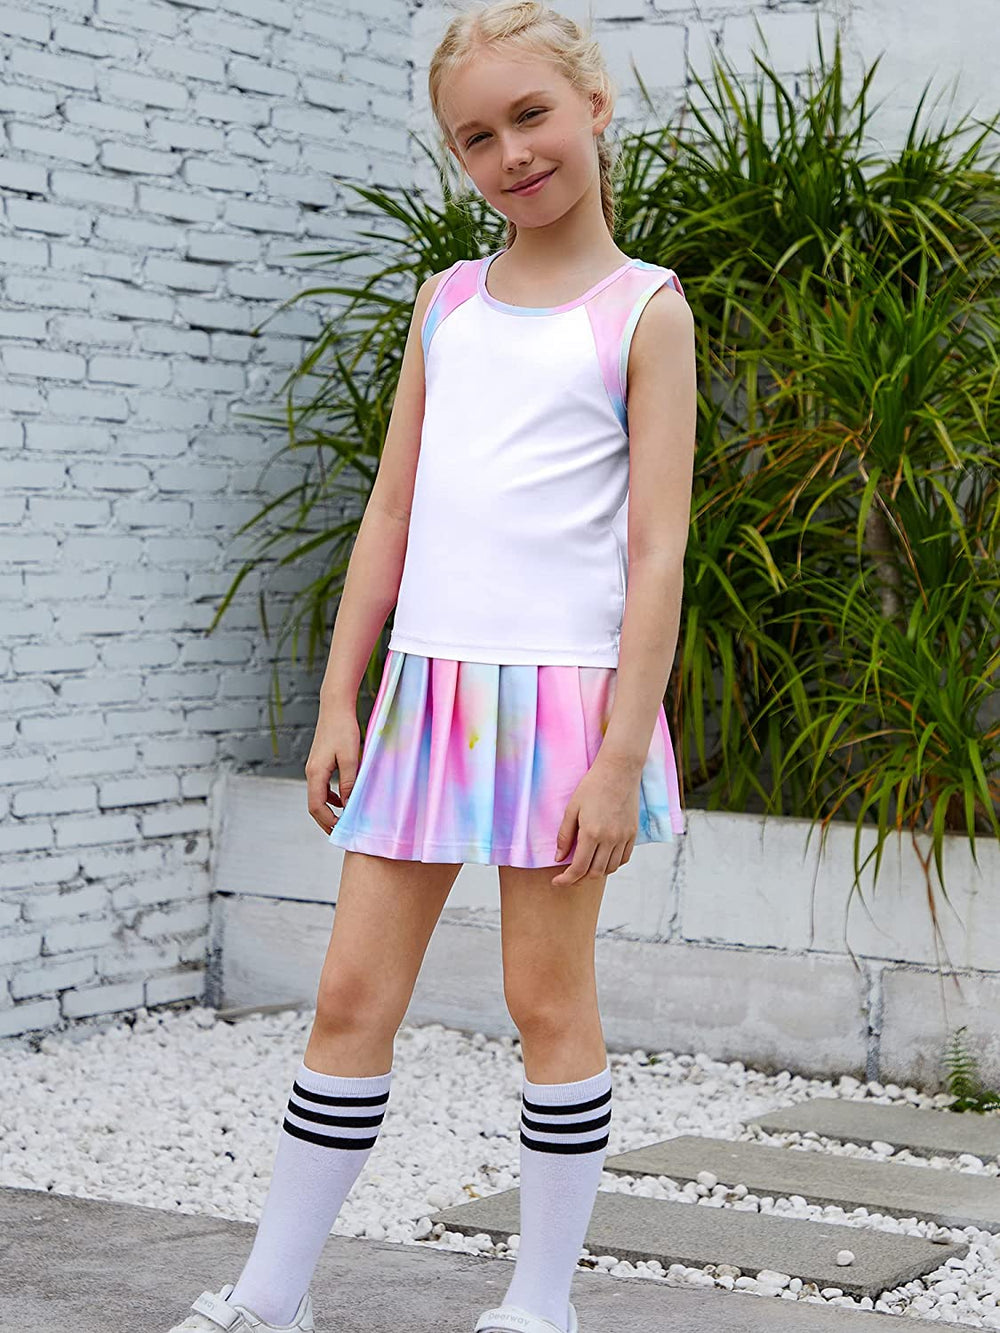 White Tie Dye Tennis Golf Athletic Outfit